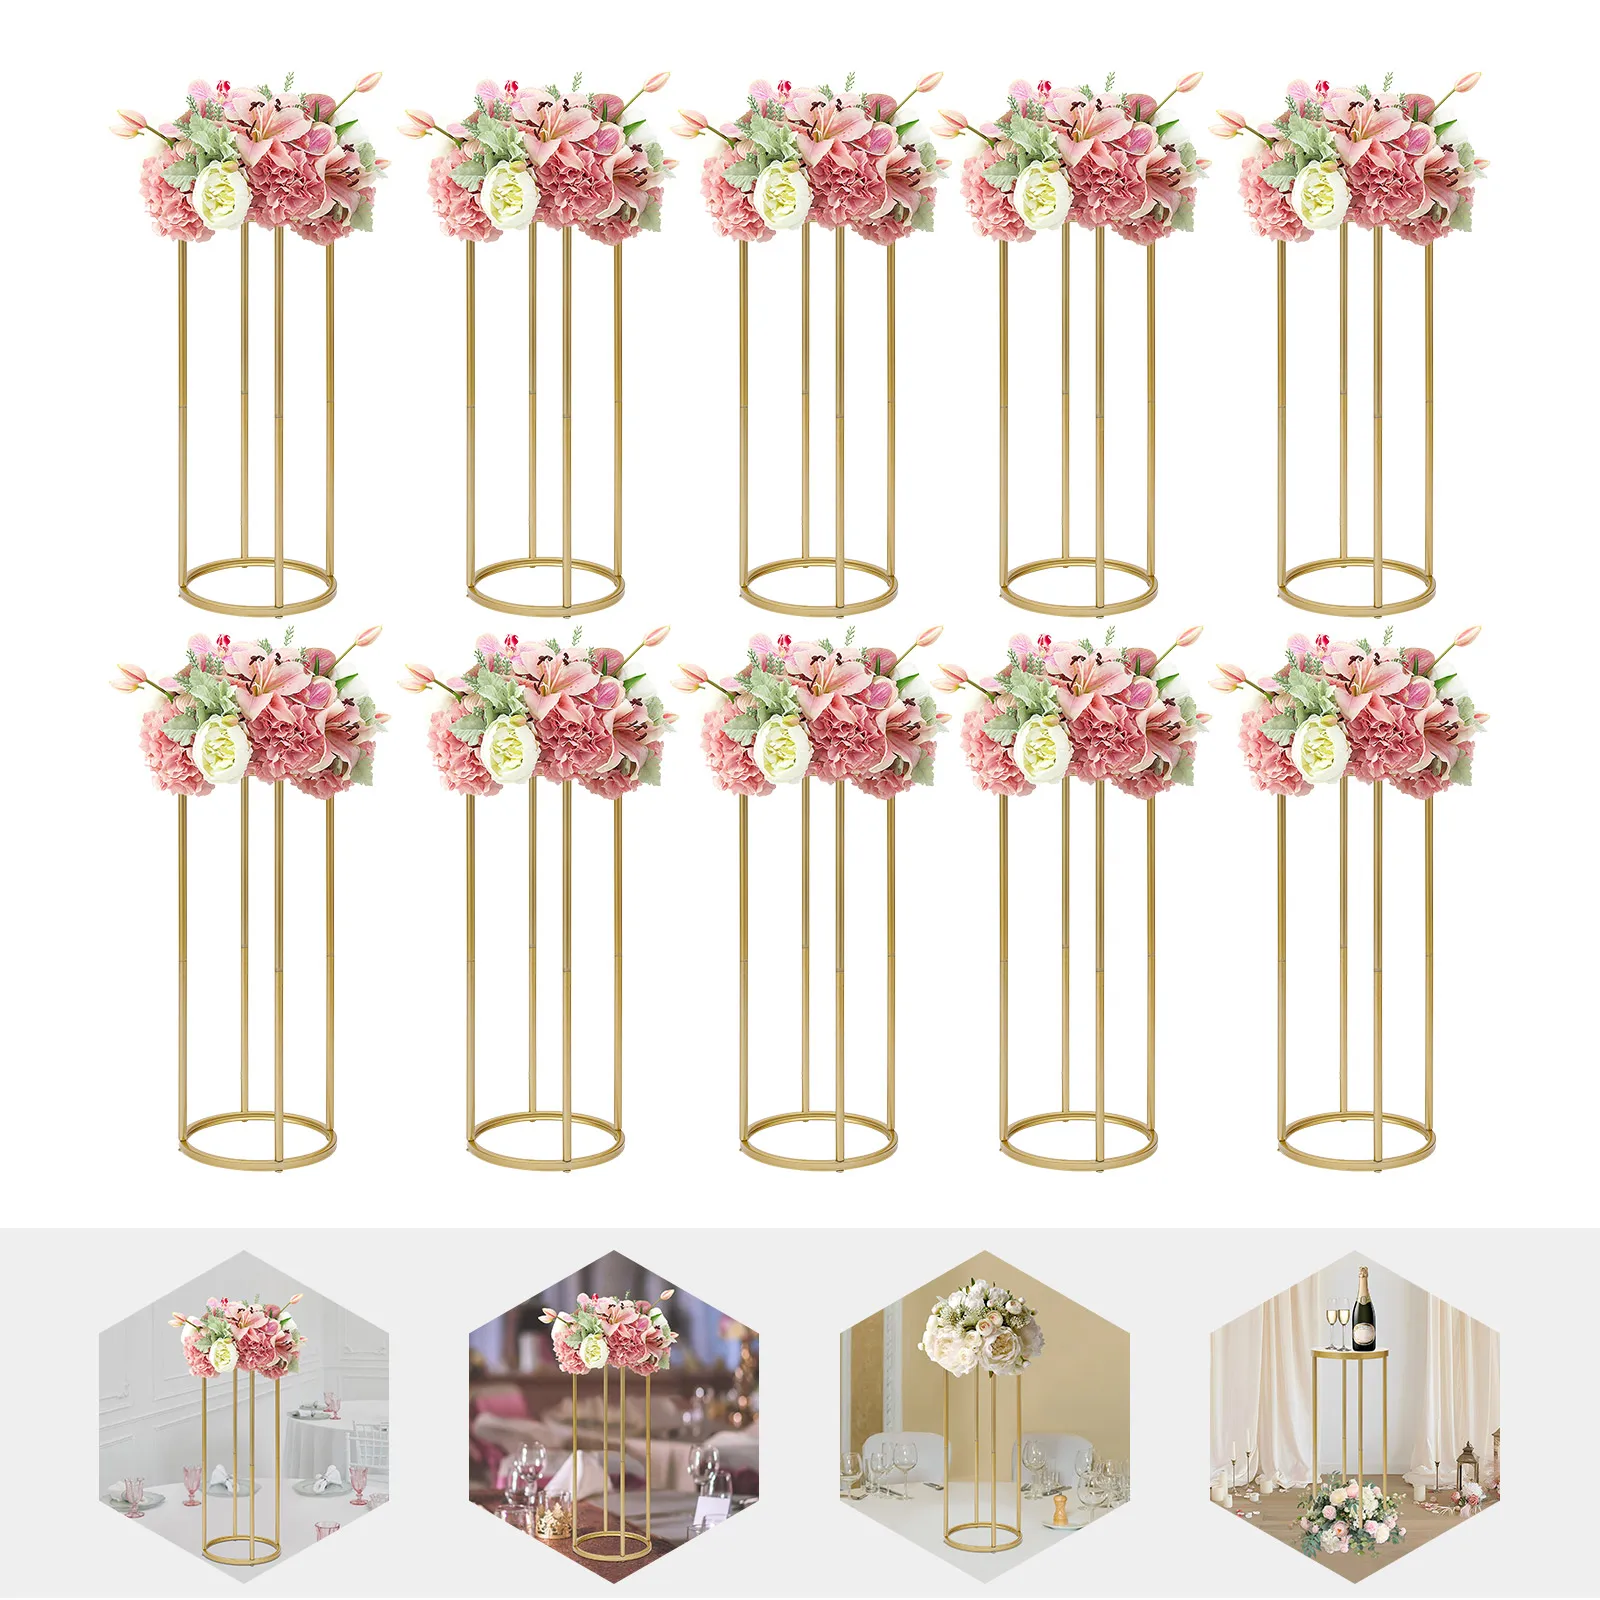 

Wedding Table Flower Centerpiece Decoration - Metal Flower Floor Stand Vases Geometric Tables for Birthday Party Reception 10pcs